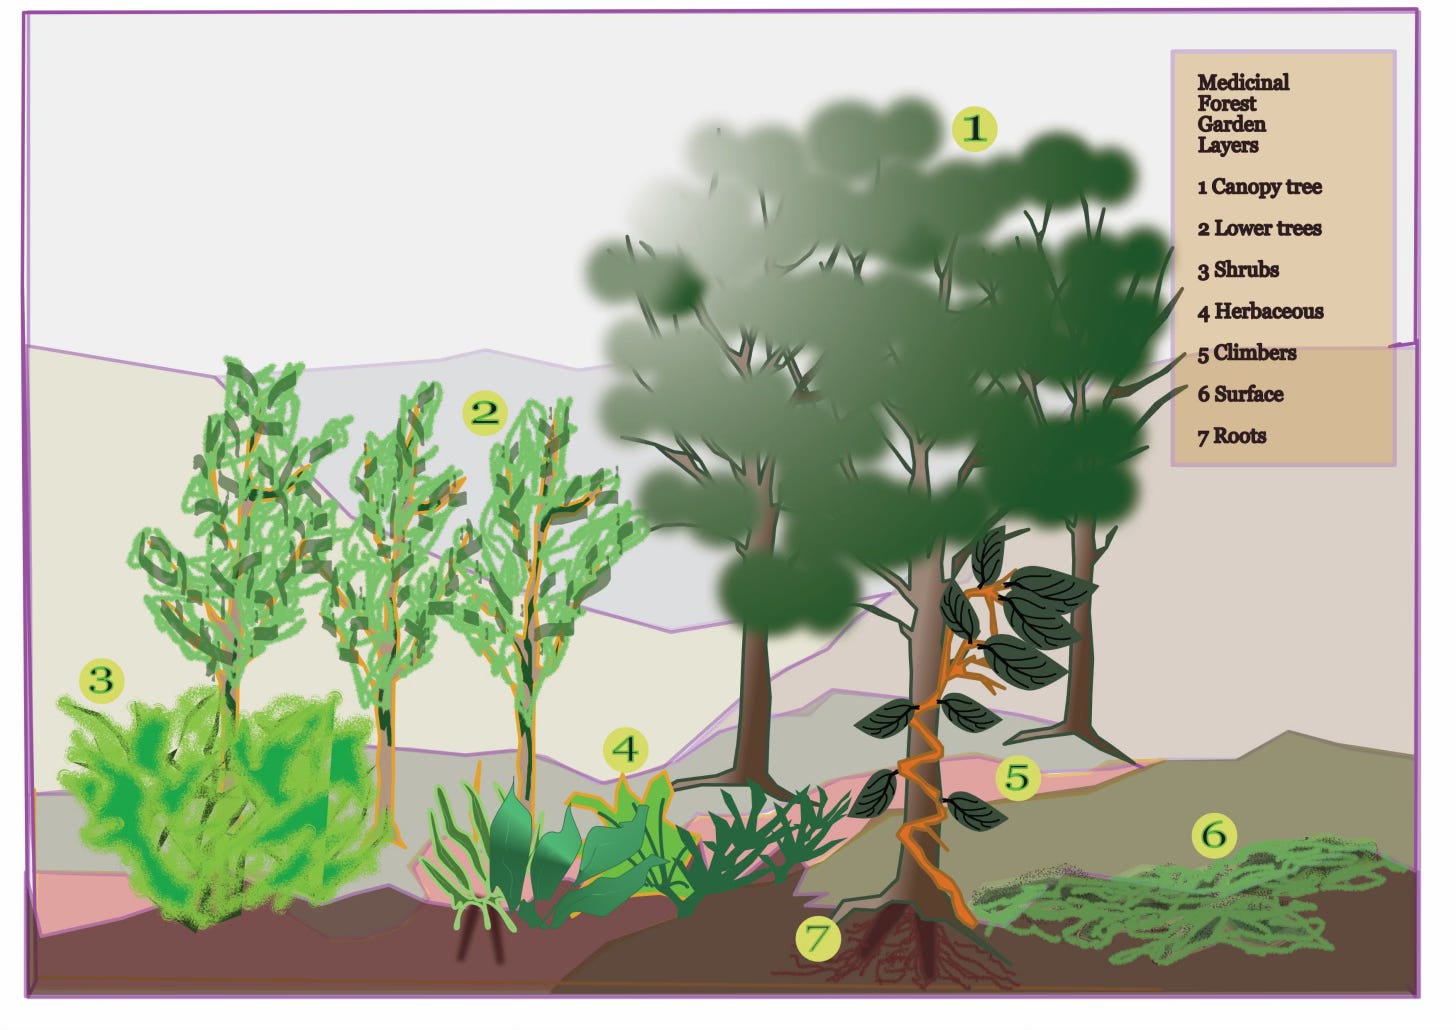 Layers of ground cover, herbs, shrubs and trees diagram